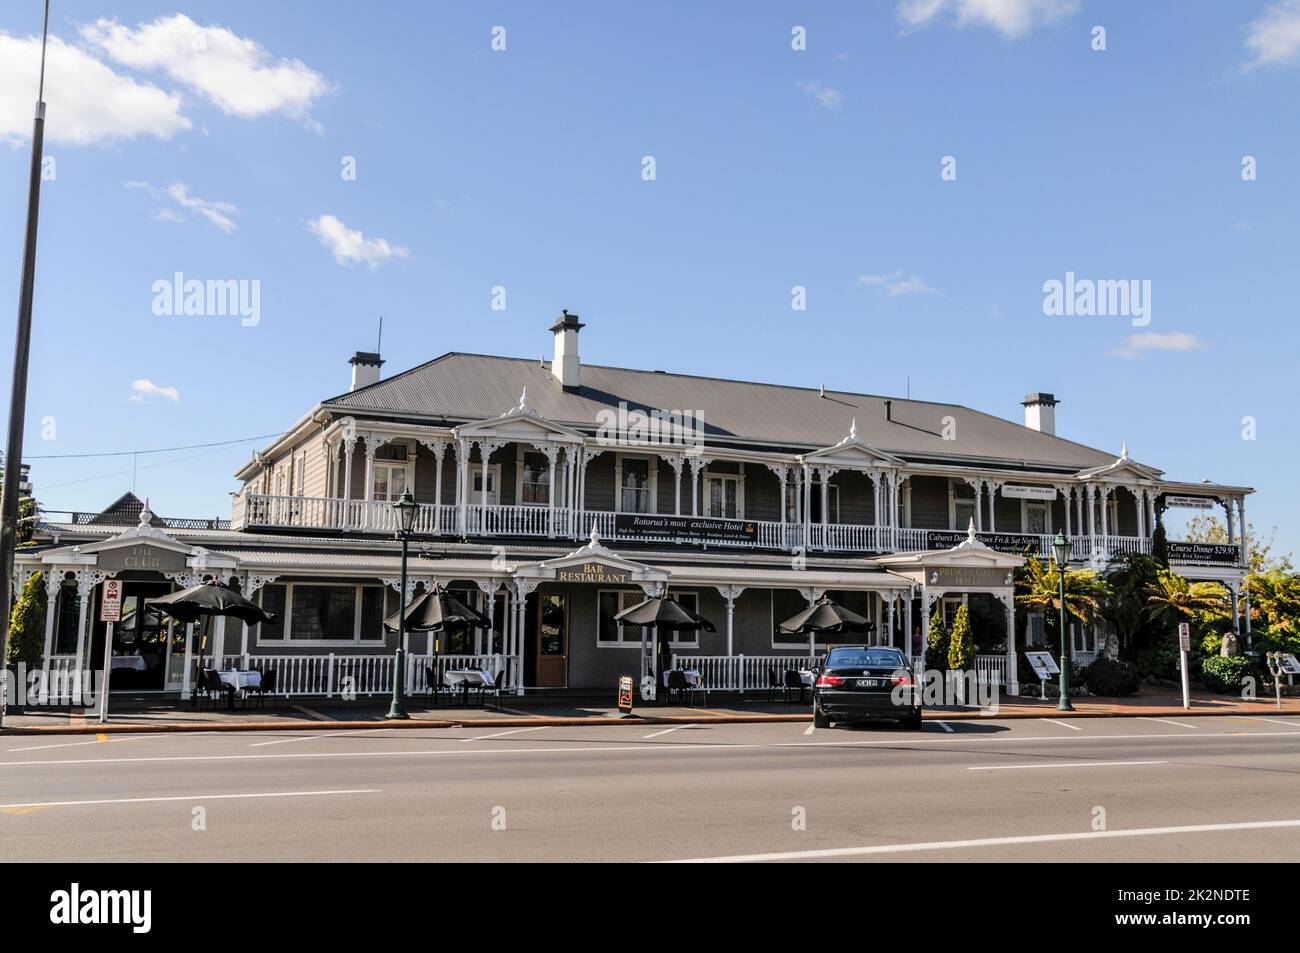 The 1897 Victorian built Princes Gate Hotel was New Zealand's first private hotel in Rotorua, a town on the shore of lake Rotorua on New Zealand's Nor Stock Photo